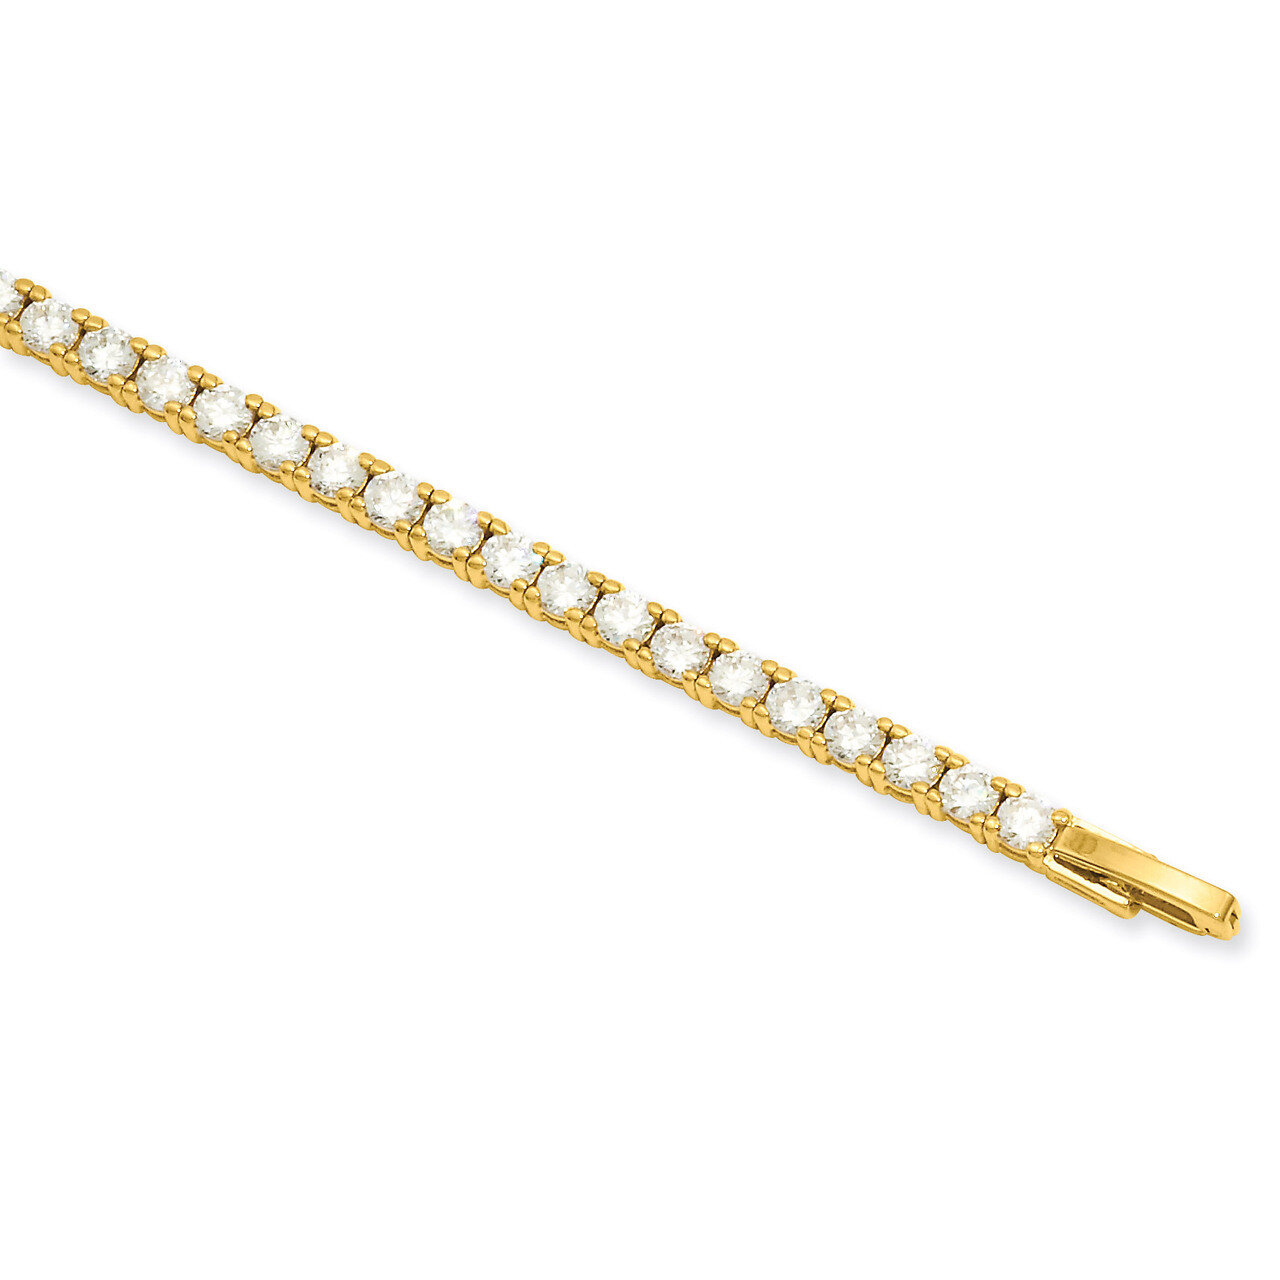 Kelly Waters Prong Set White Diamond Tennis Bracelet 7.25 Inch Gold-plated KW466-7.25